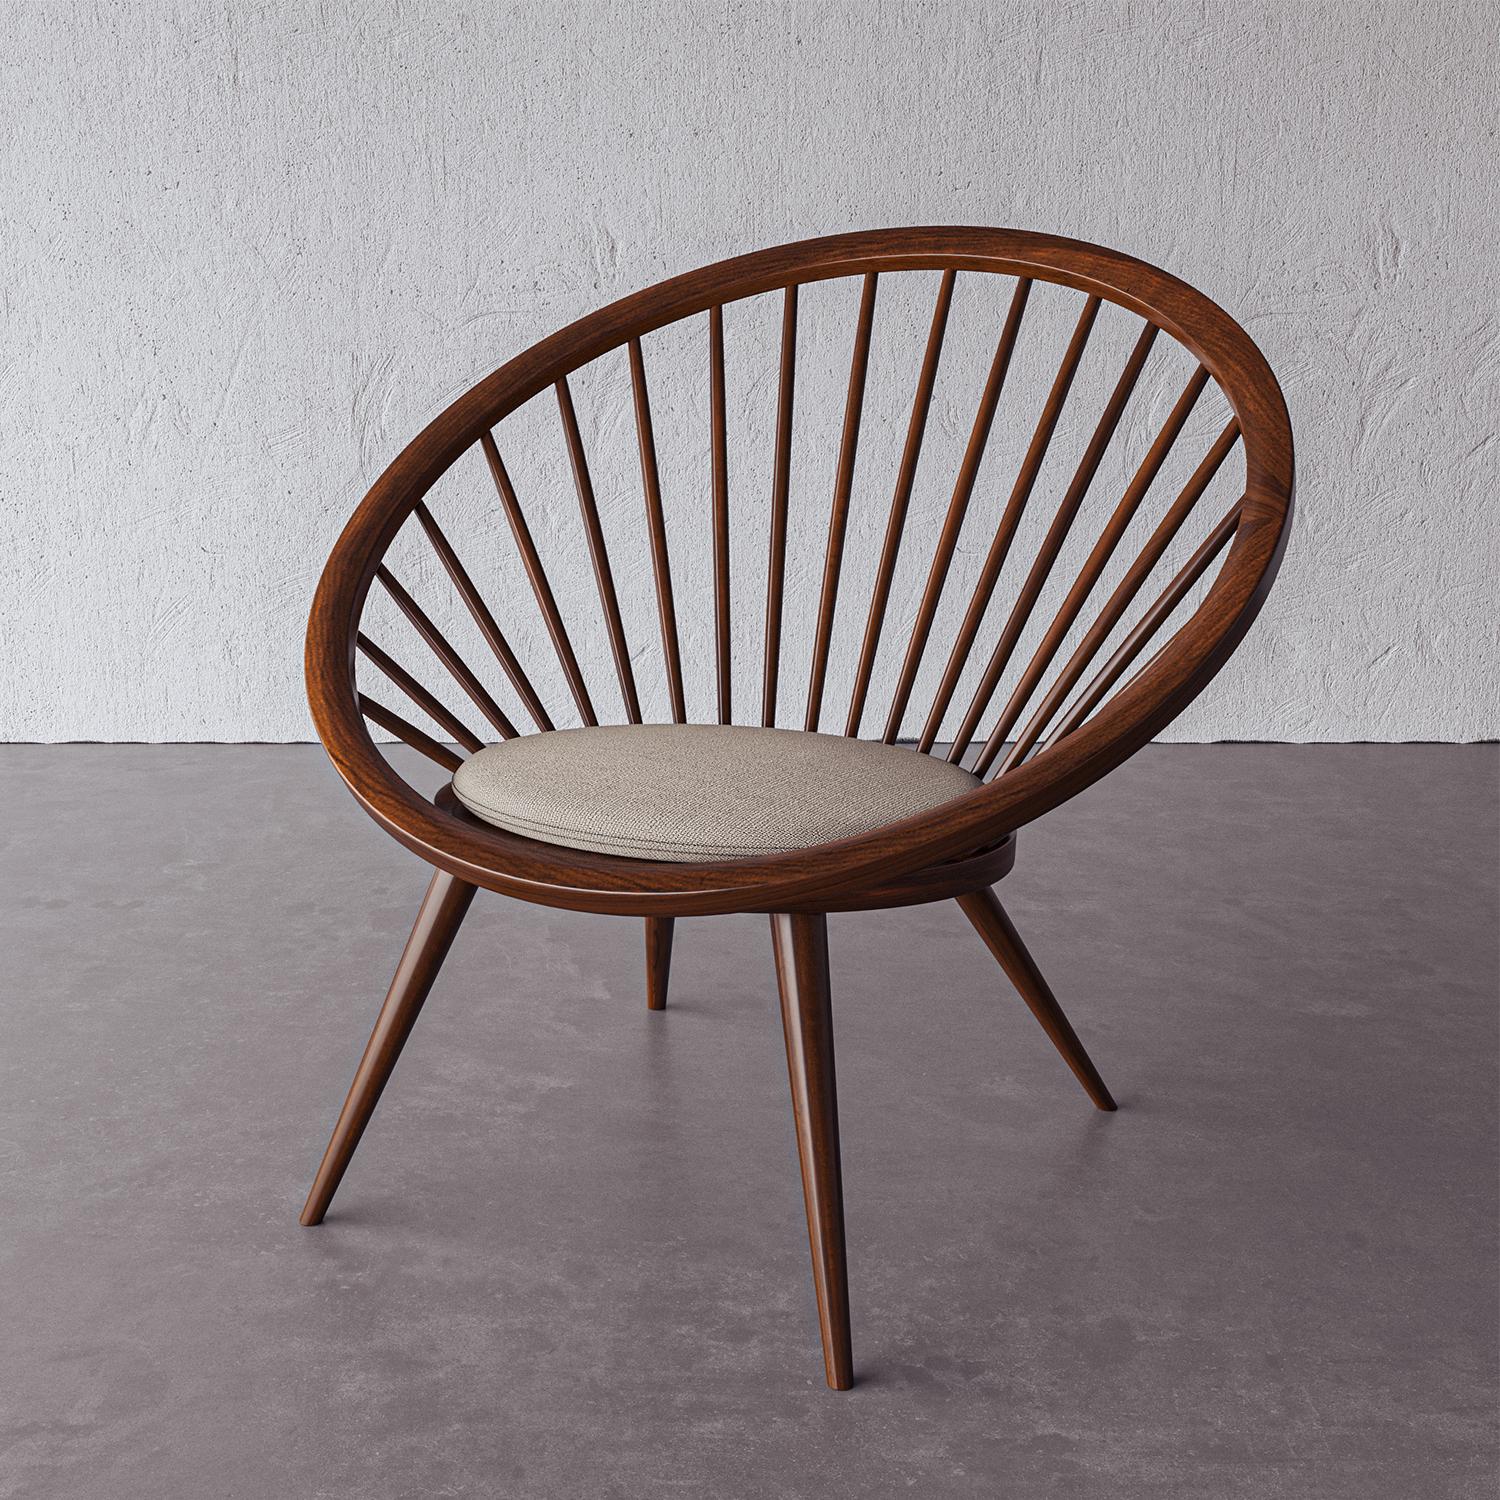 The Windsor chair meets curves and the design legacy of Isamu Noguchi and George Nakashima as this Laurent chair celebrates material and harkens back to the classic dowel chair, reinterpreted. The dramatic curving silhouette adds a sculptural